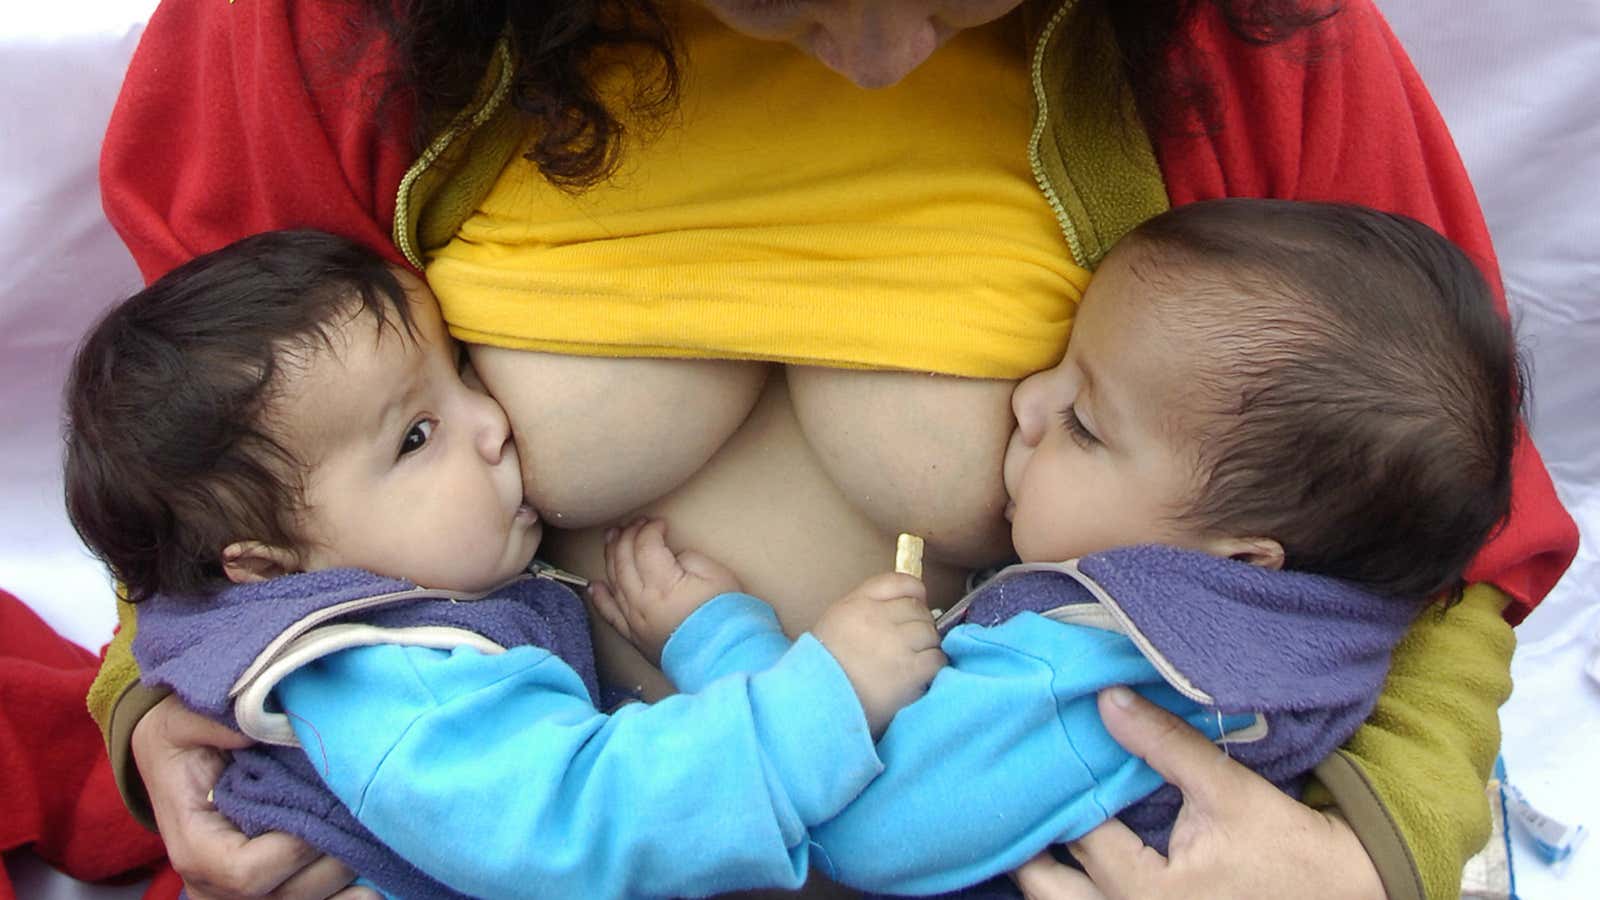 A breastfeeding mother in Peru. We need to ensure they get the benefits of her milk even if she is away.